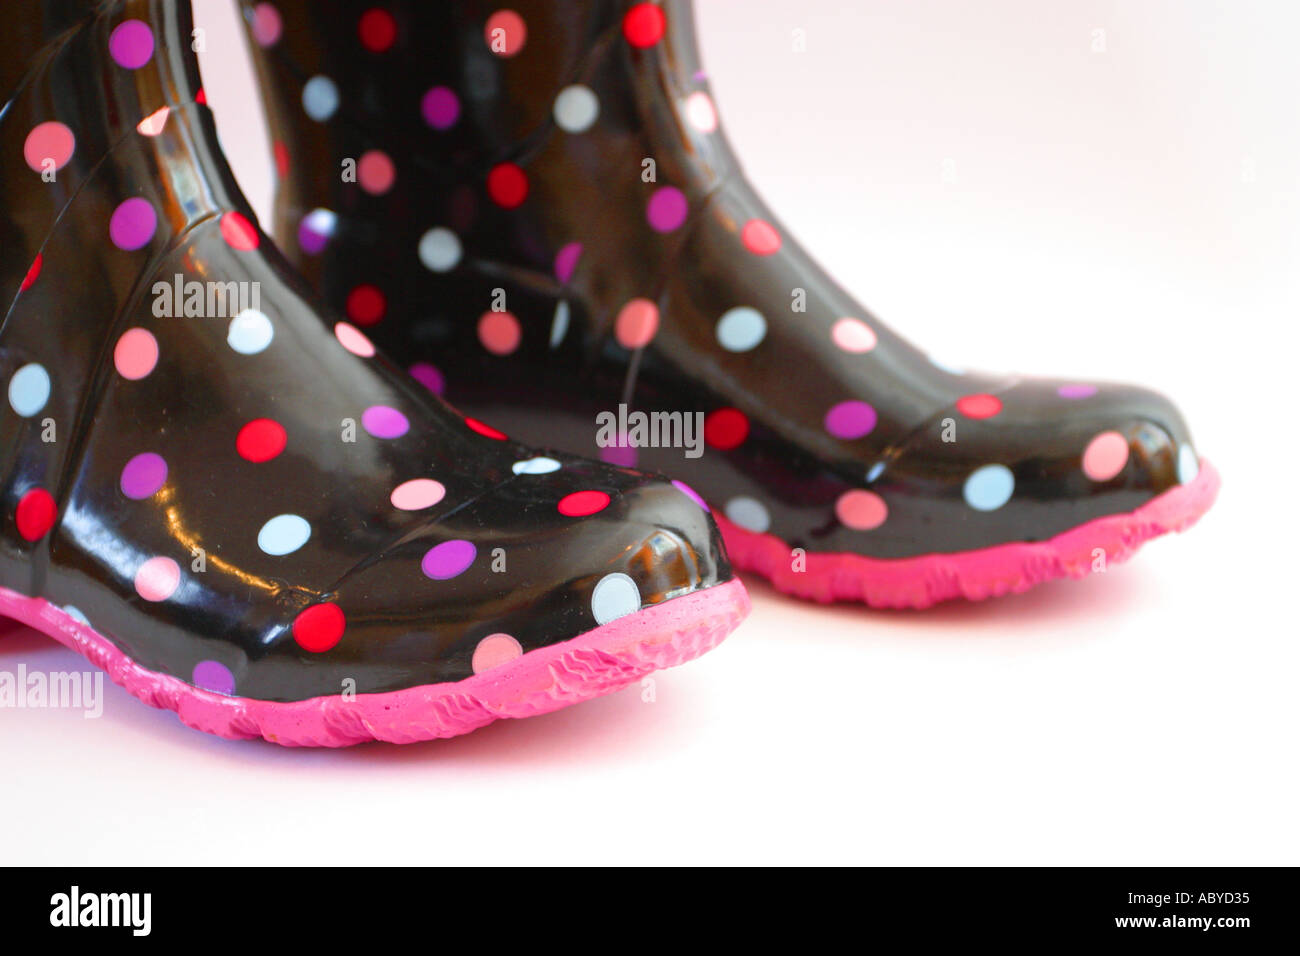 Colourful spotted wellington boots wellies boot footwear fashion Stock Photo